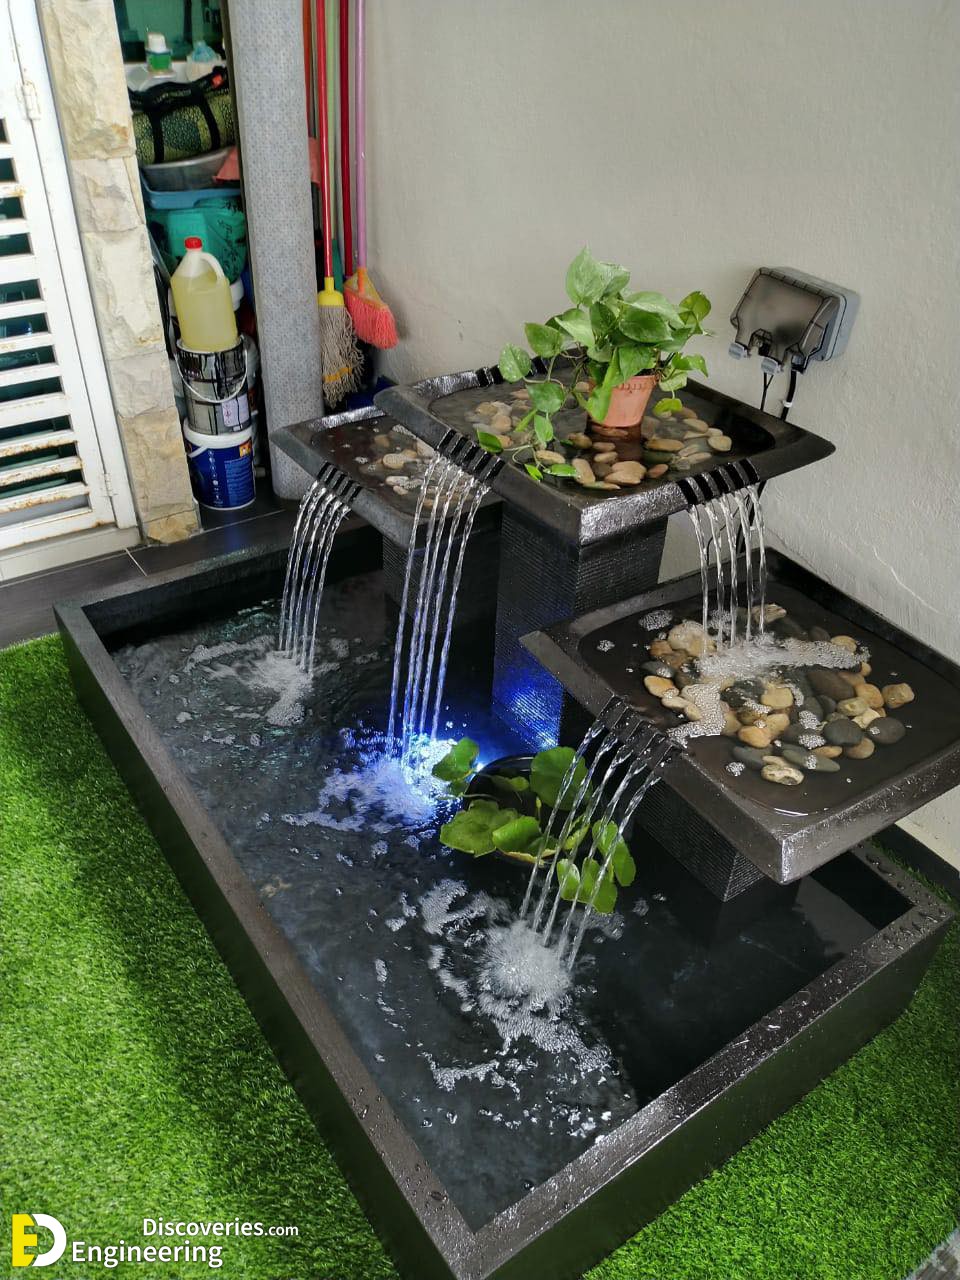 7 engineering discoveries amazing water fountain ideas to transform your home into a serene oasis